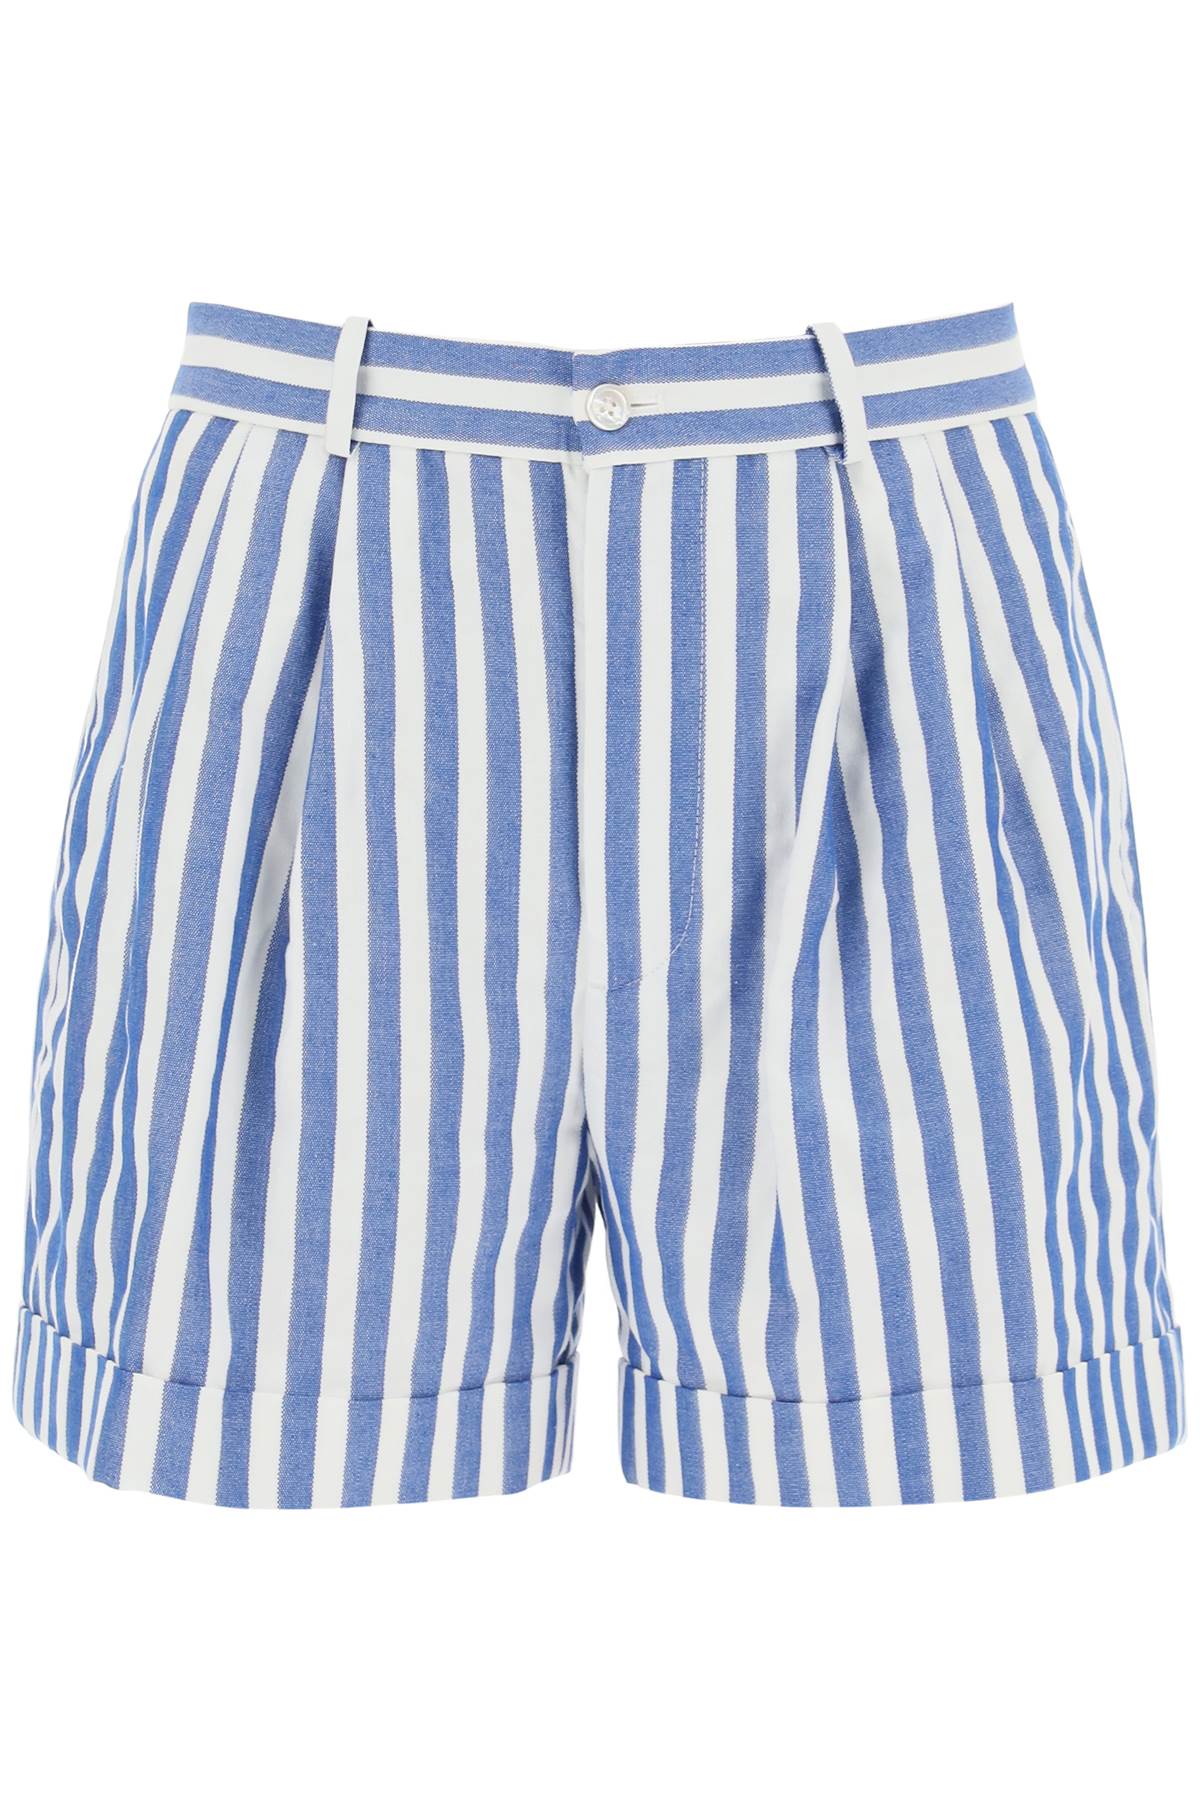 Shop Polo Ralph Lauren Striped Shorts In Blue White Awning Stripe (white)